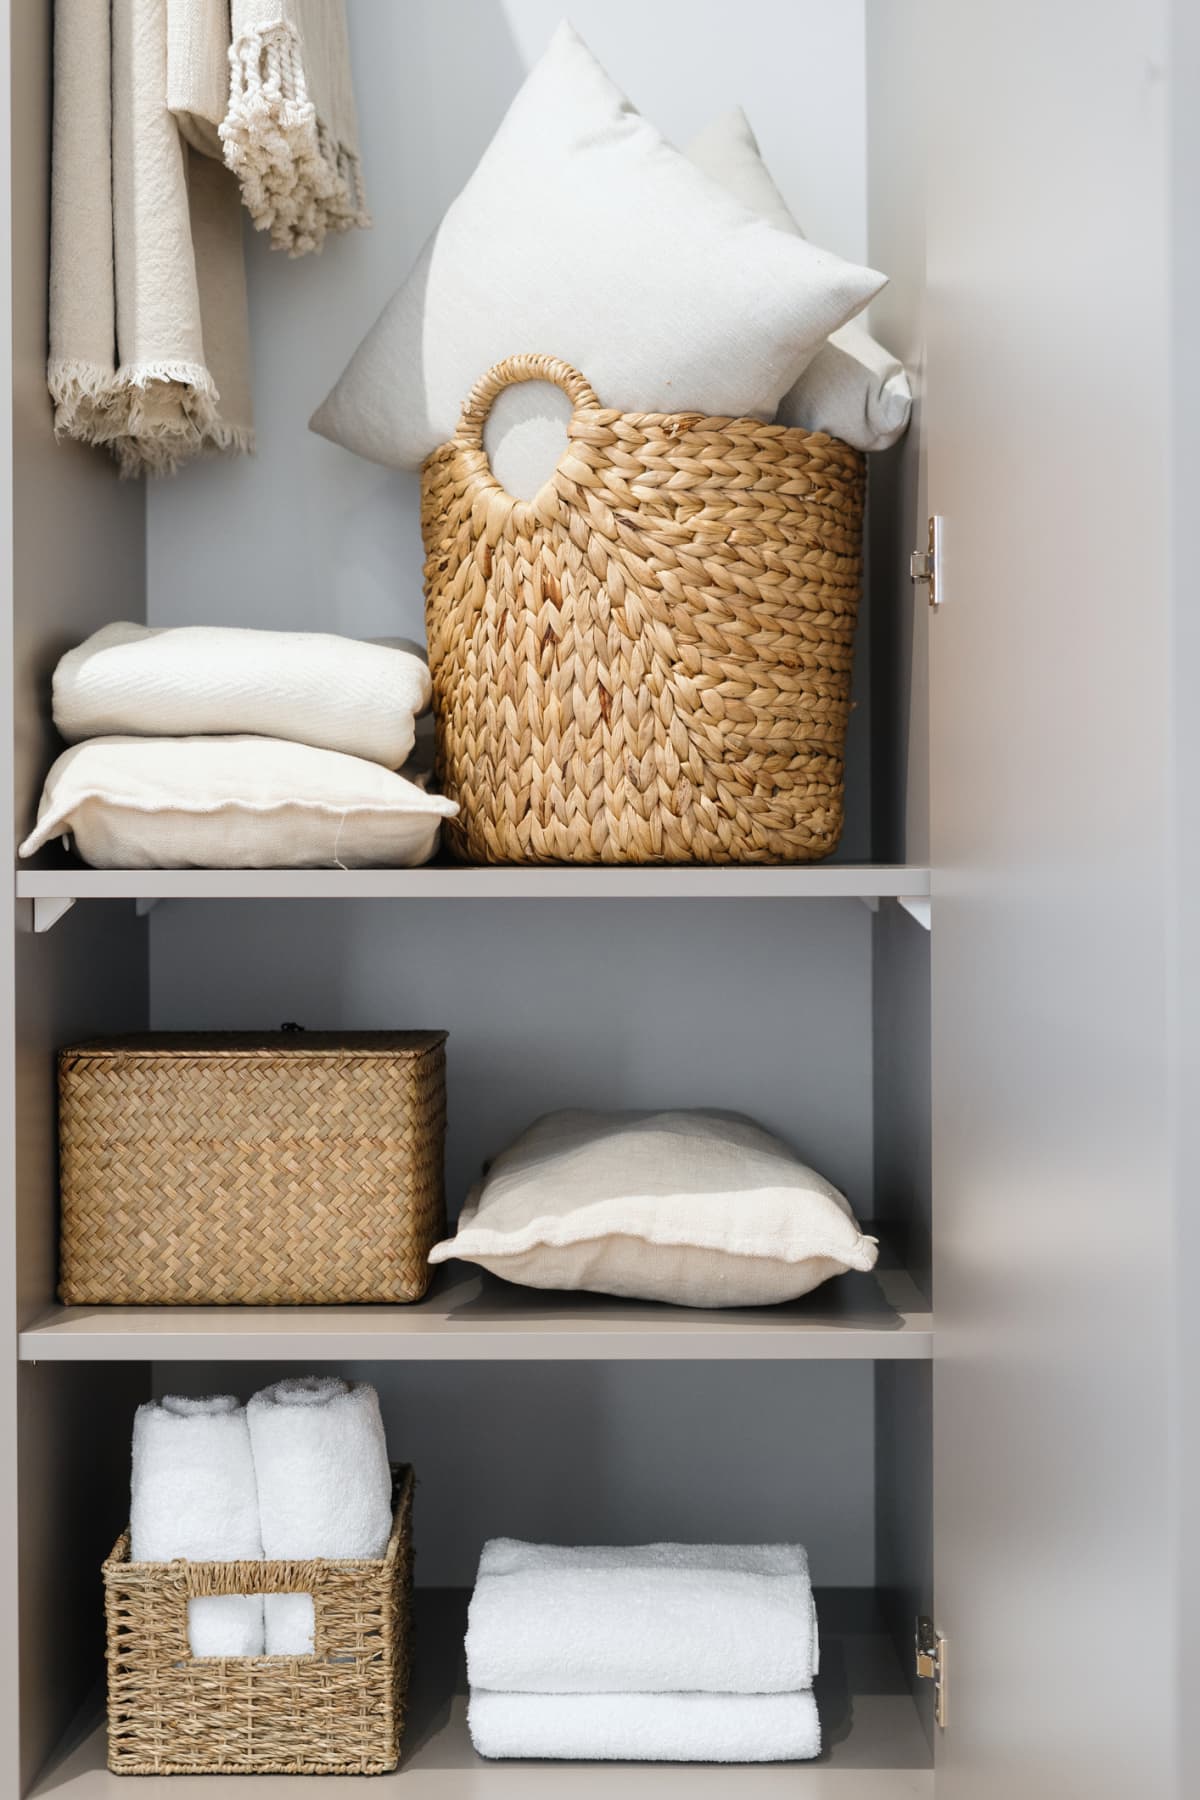 Bathroom accessories being stored on a shelves